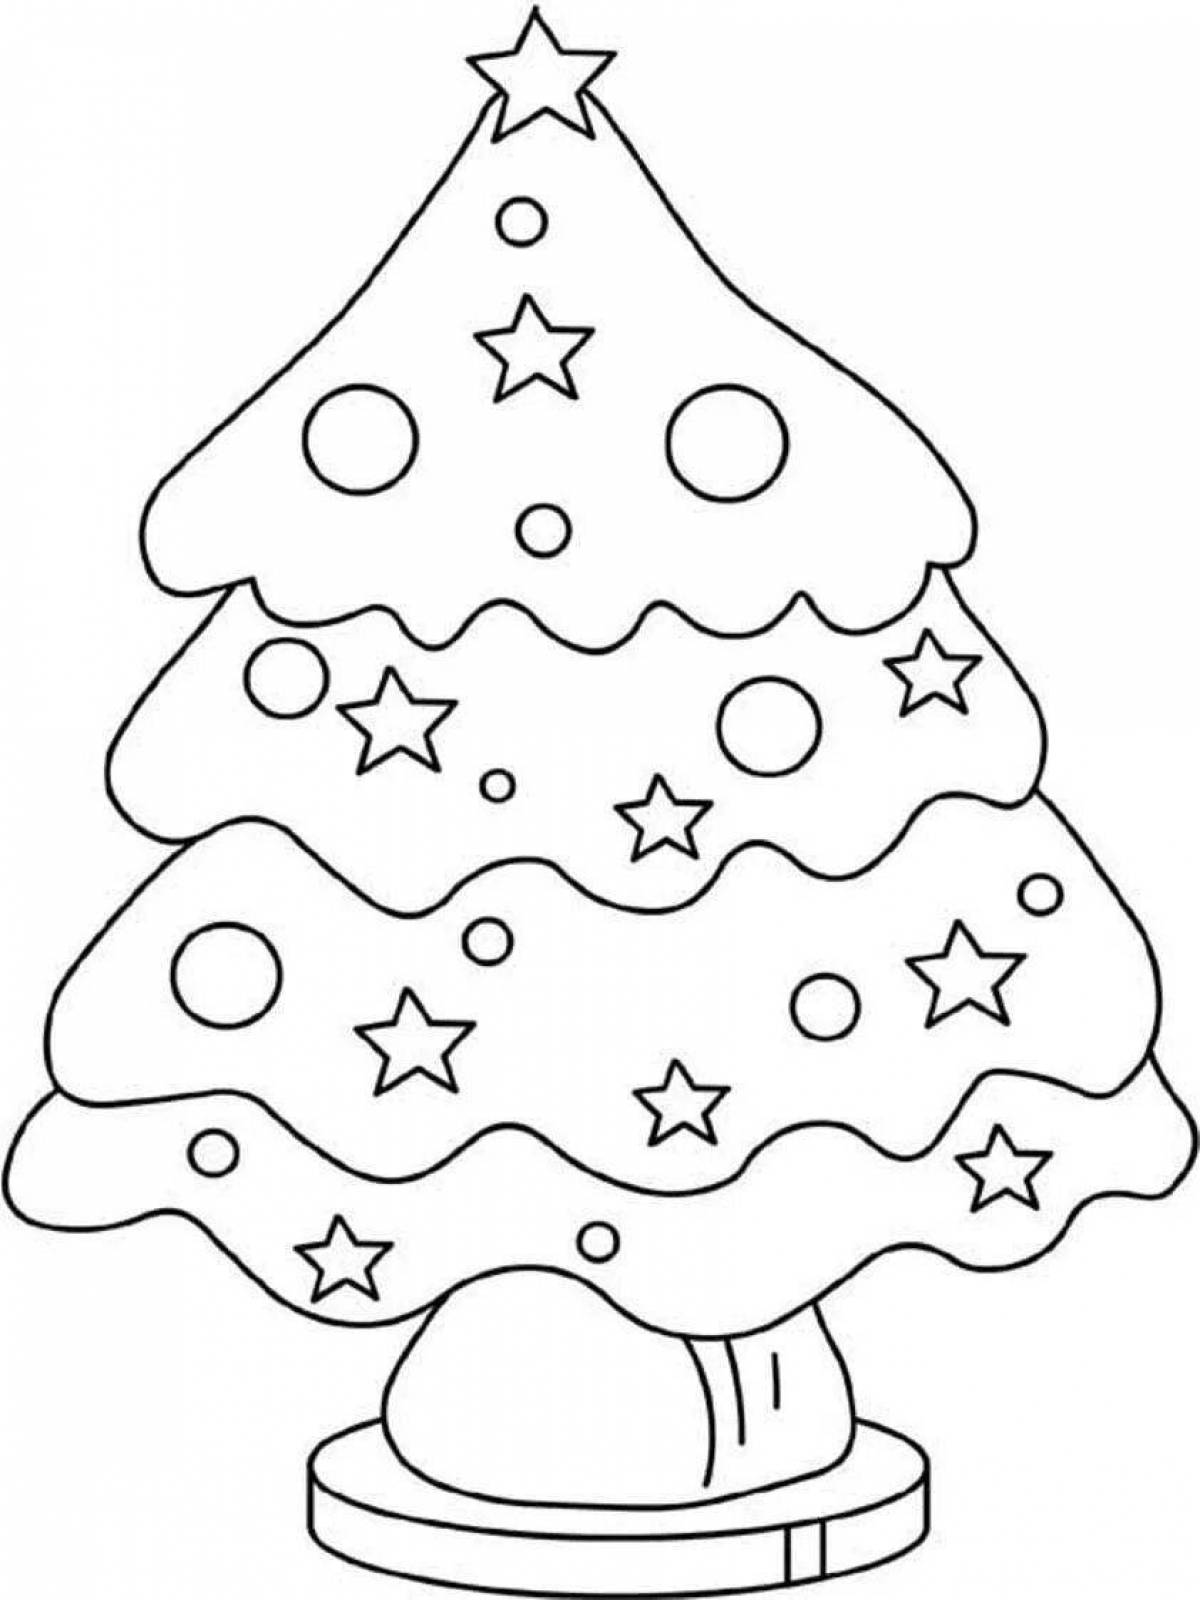 A playful Christmas tree coloring page for 3-4 year olds